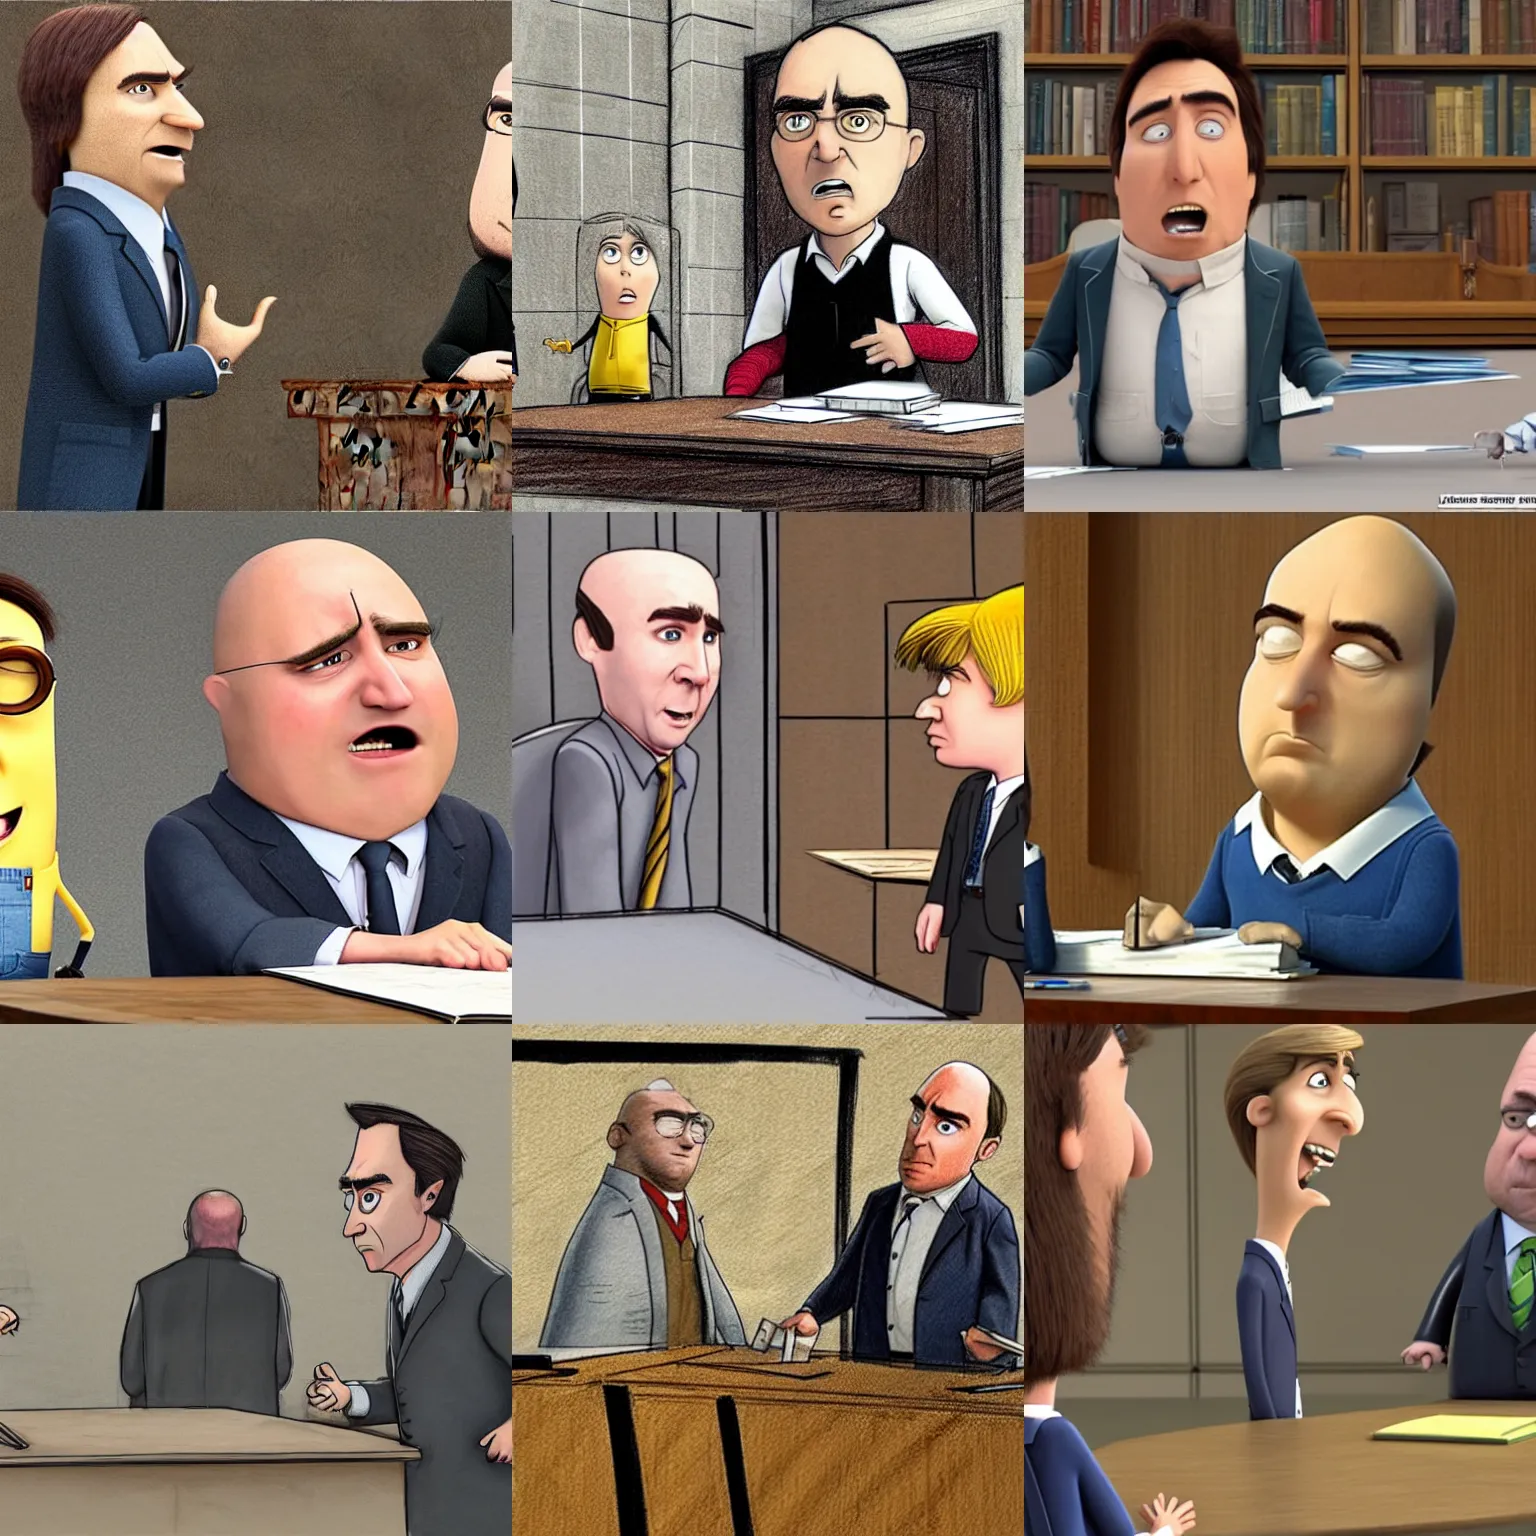 Prompt: A realistic courtroom sketch of Jimmy McGill from the television show Breaking Bad arguing with Gru from the movie Despicable Me